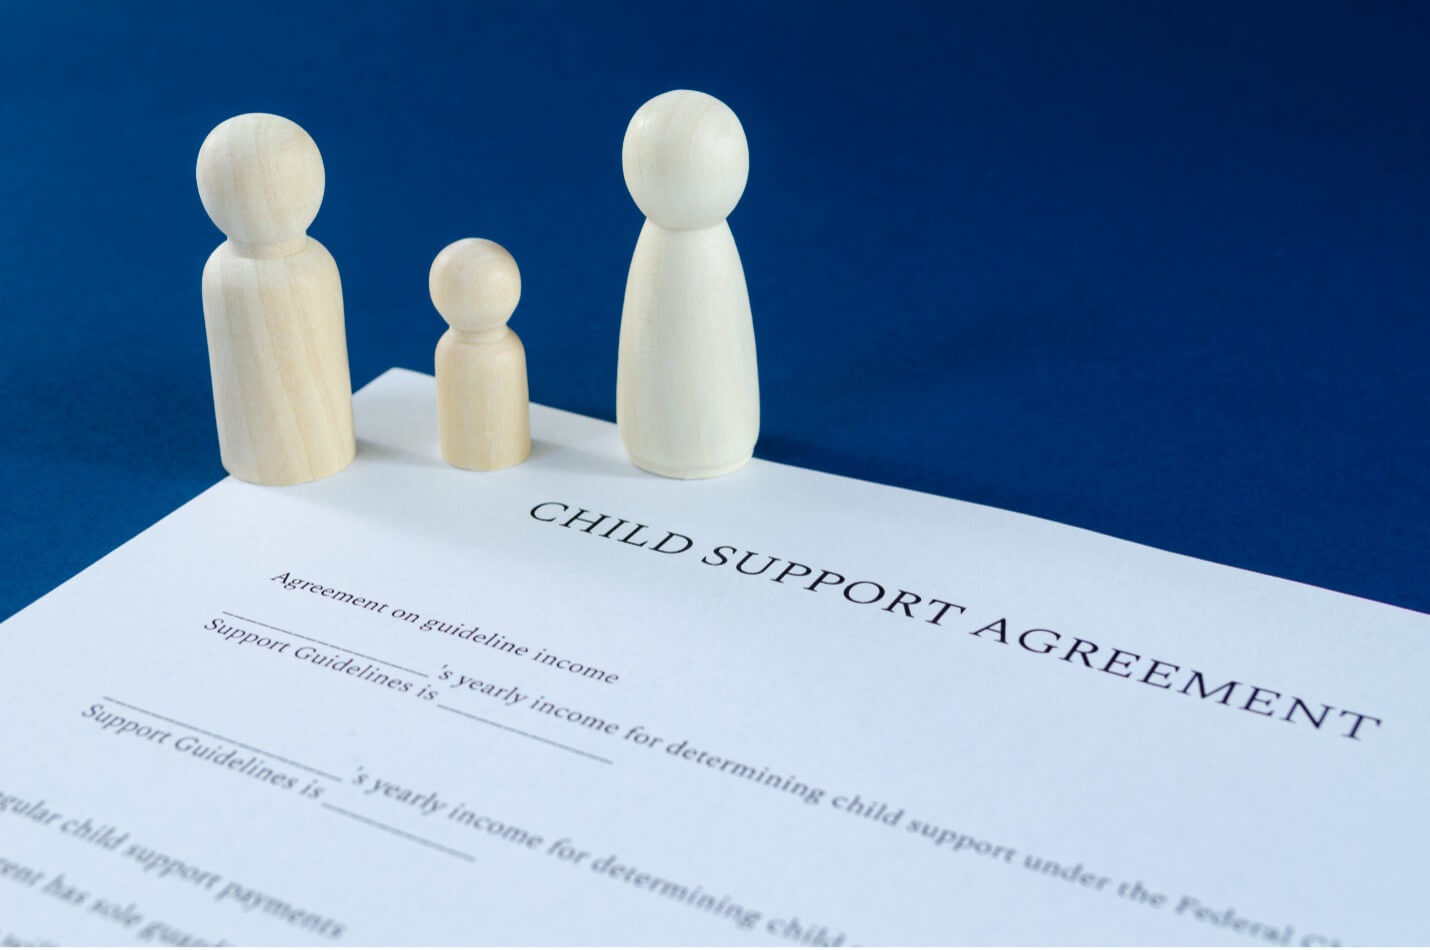 chess pawn pieces on top on child support documents